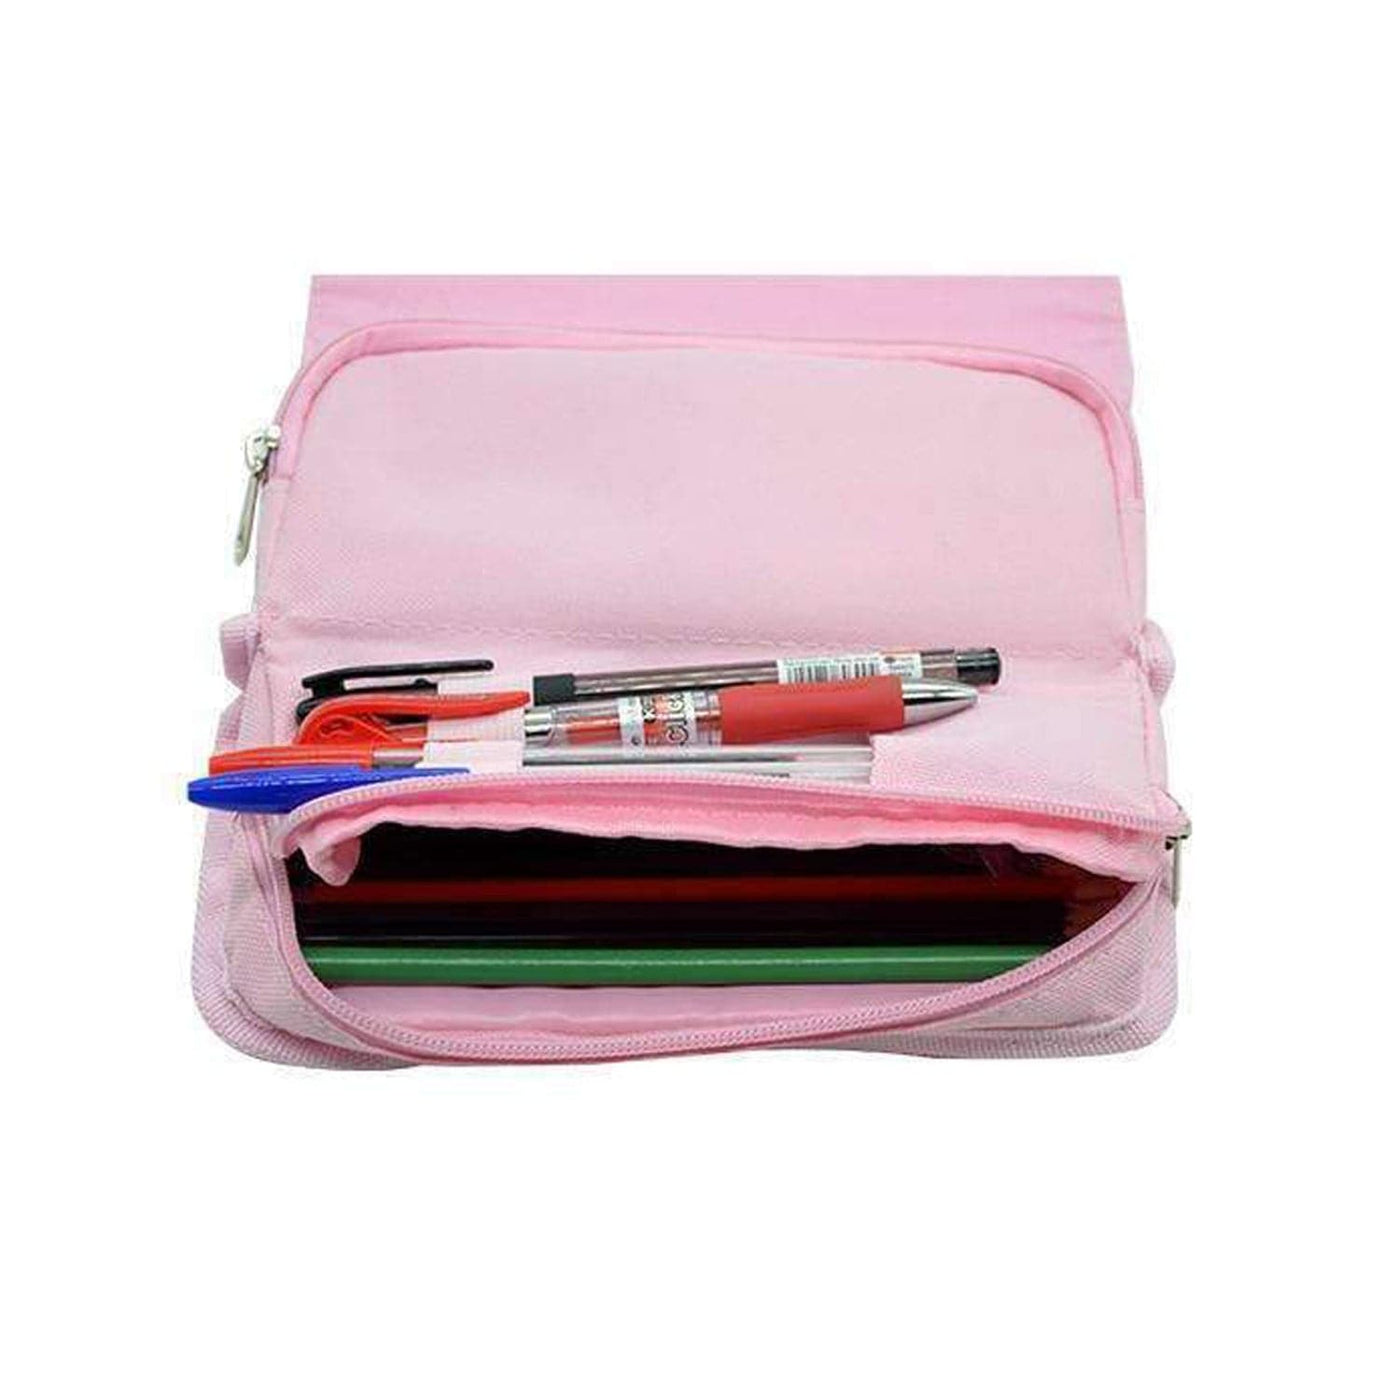 Merry Christmas - Christmas Patterns Pencil Case